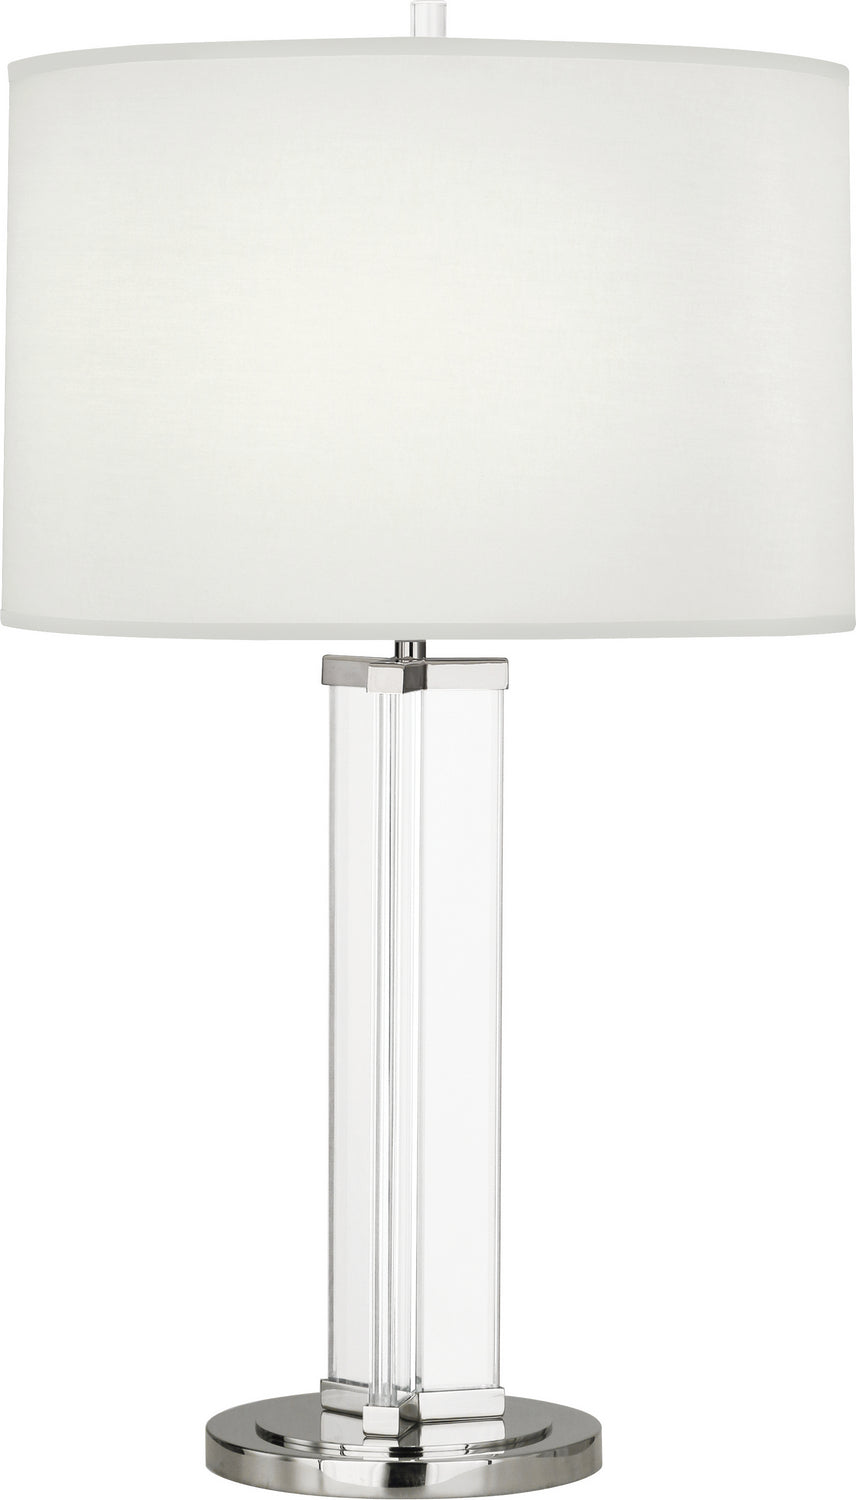 Robert Abbey - One Light Table Lamp - Fineas - Clear Glass and Polished Nickel- Union Lighting Luminaires Decor